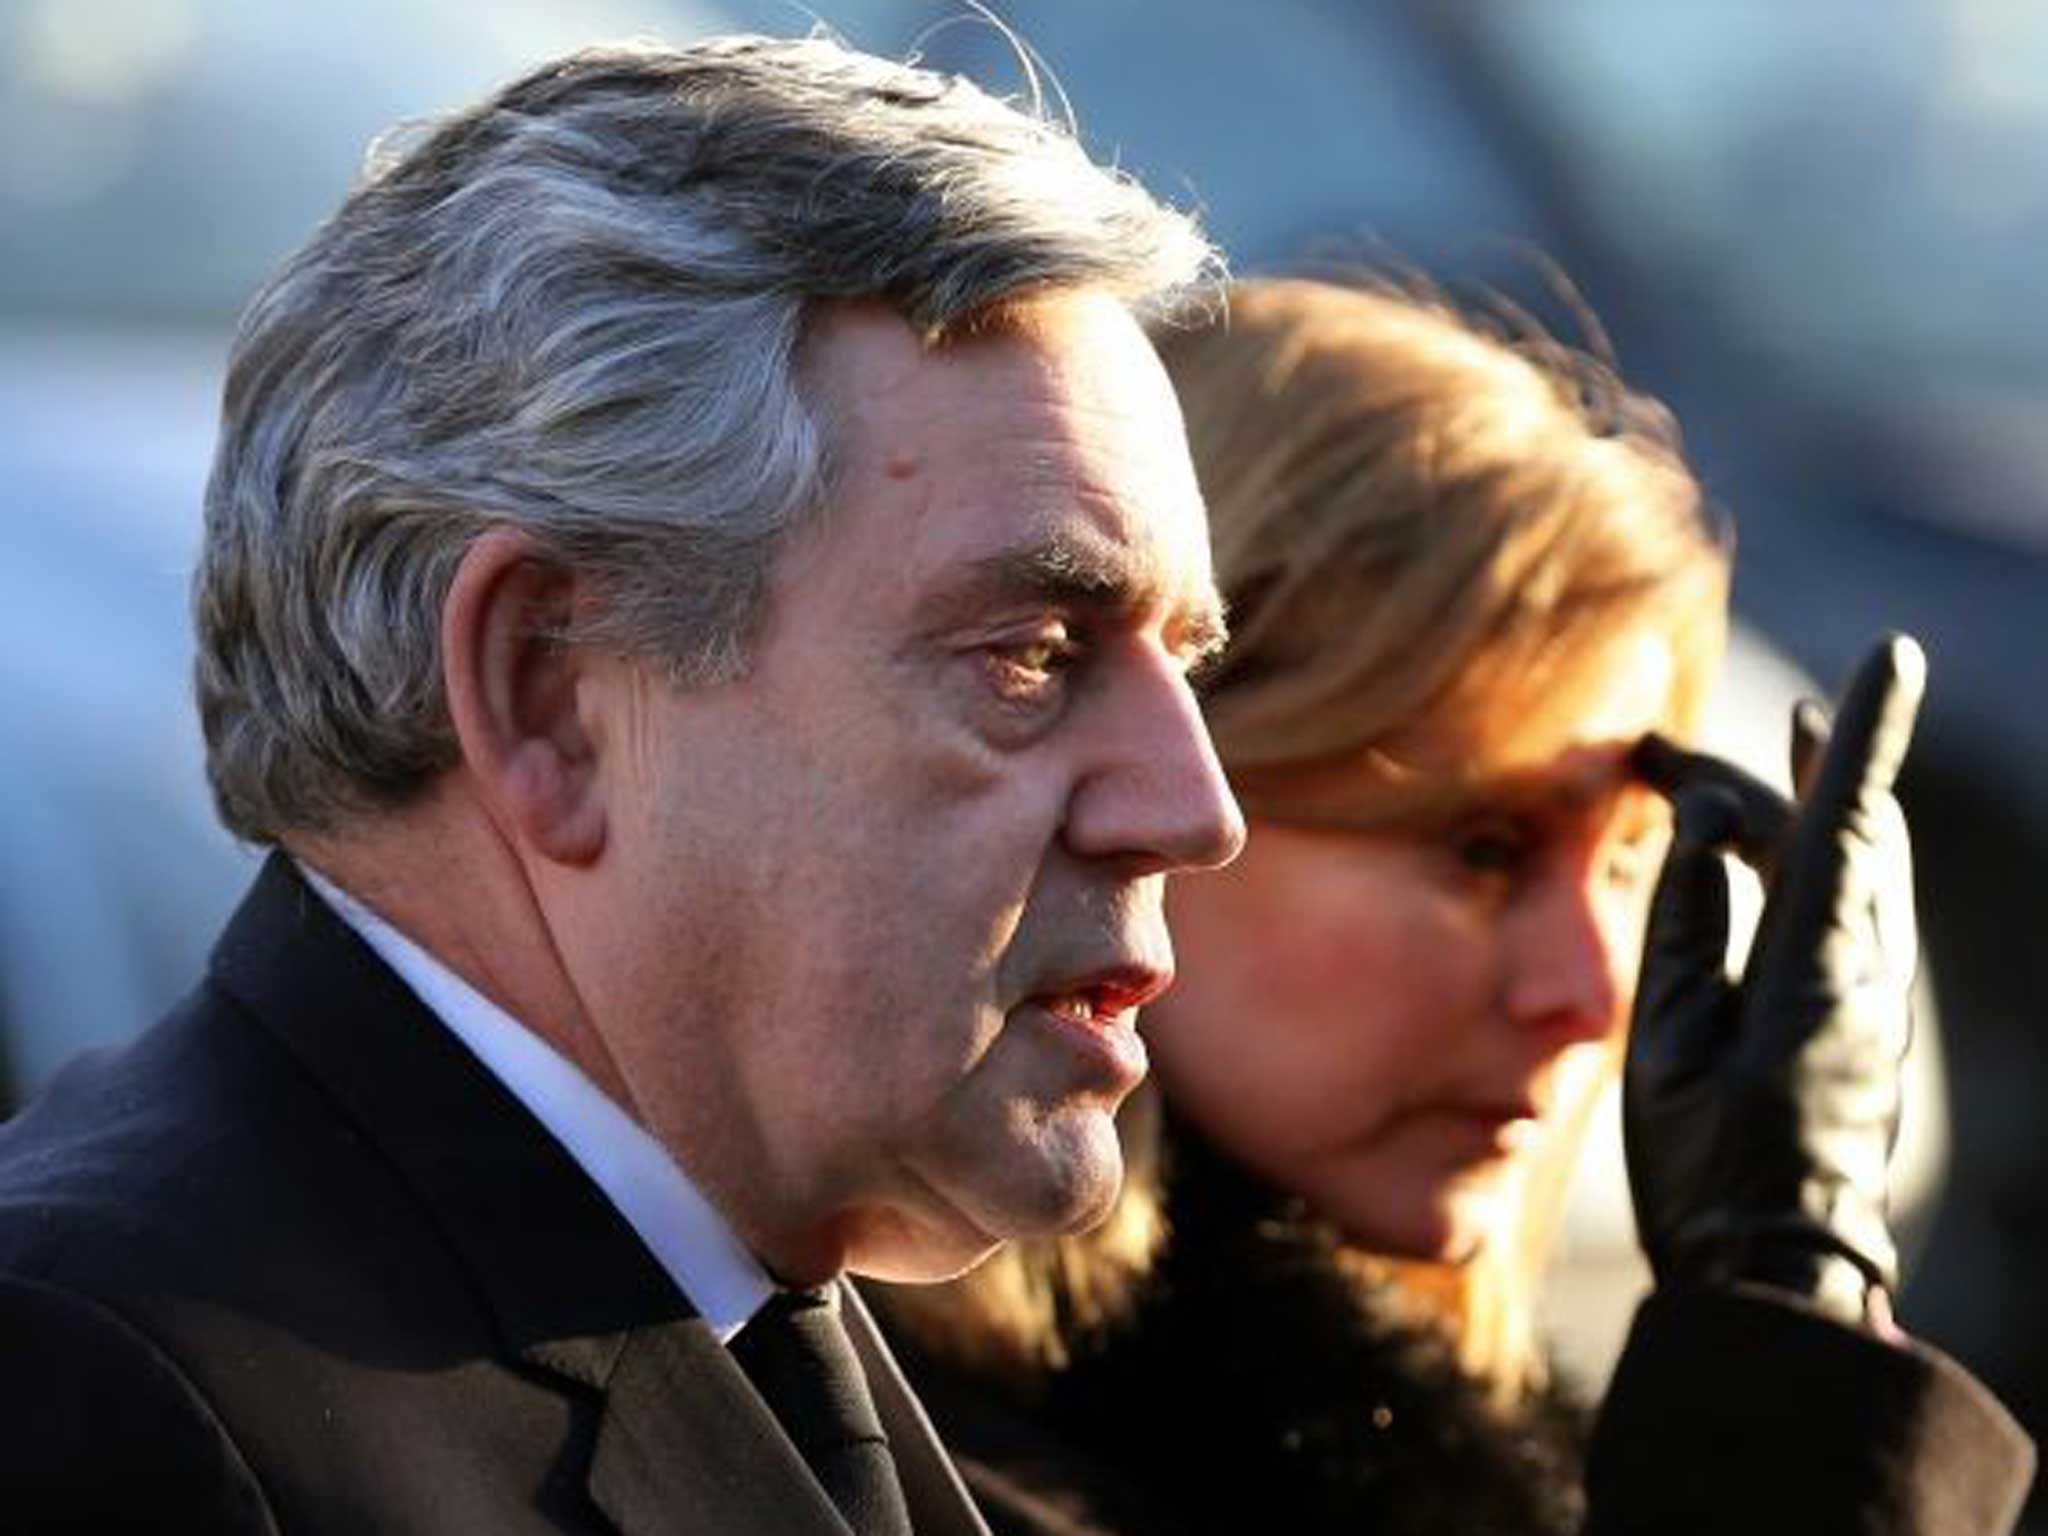 Economic recovery did not prevent former Prime Minister Gordon Brown loosing the election